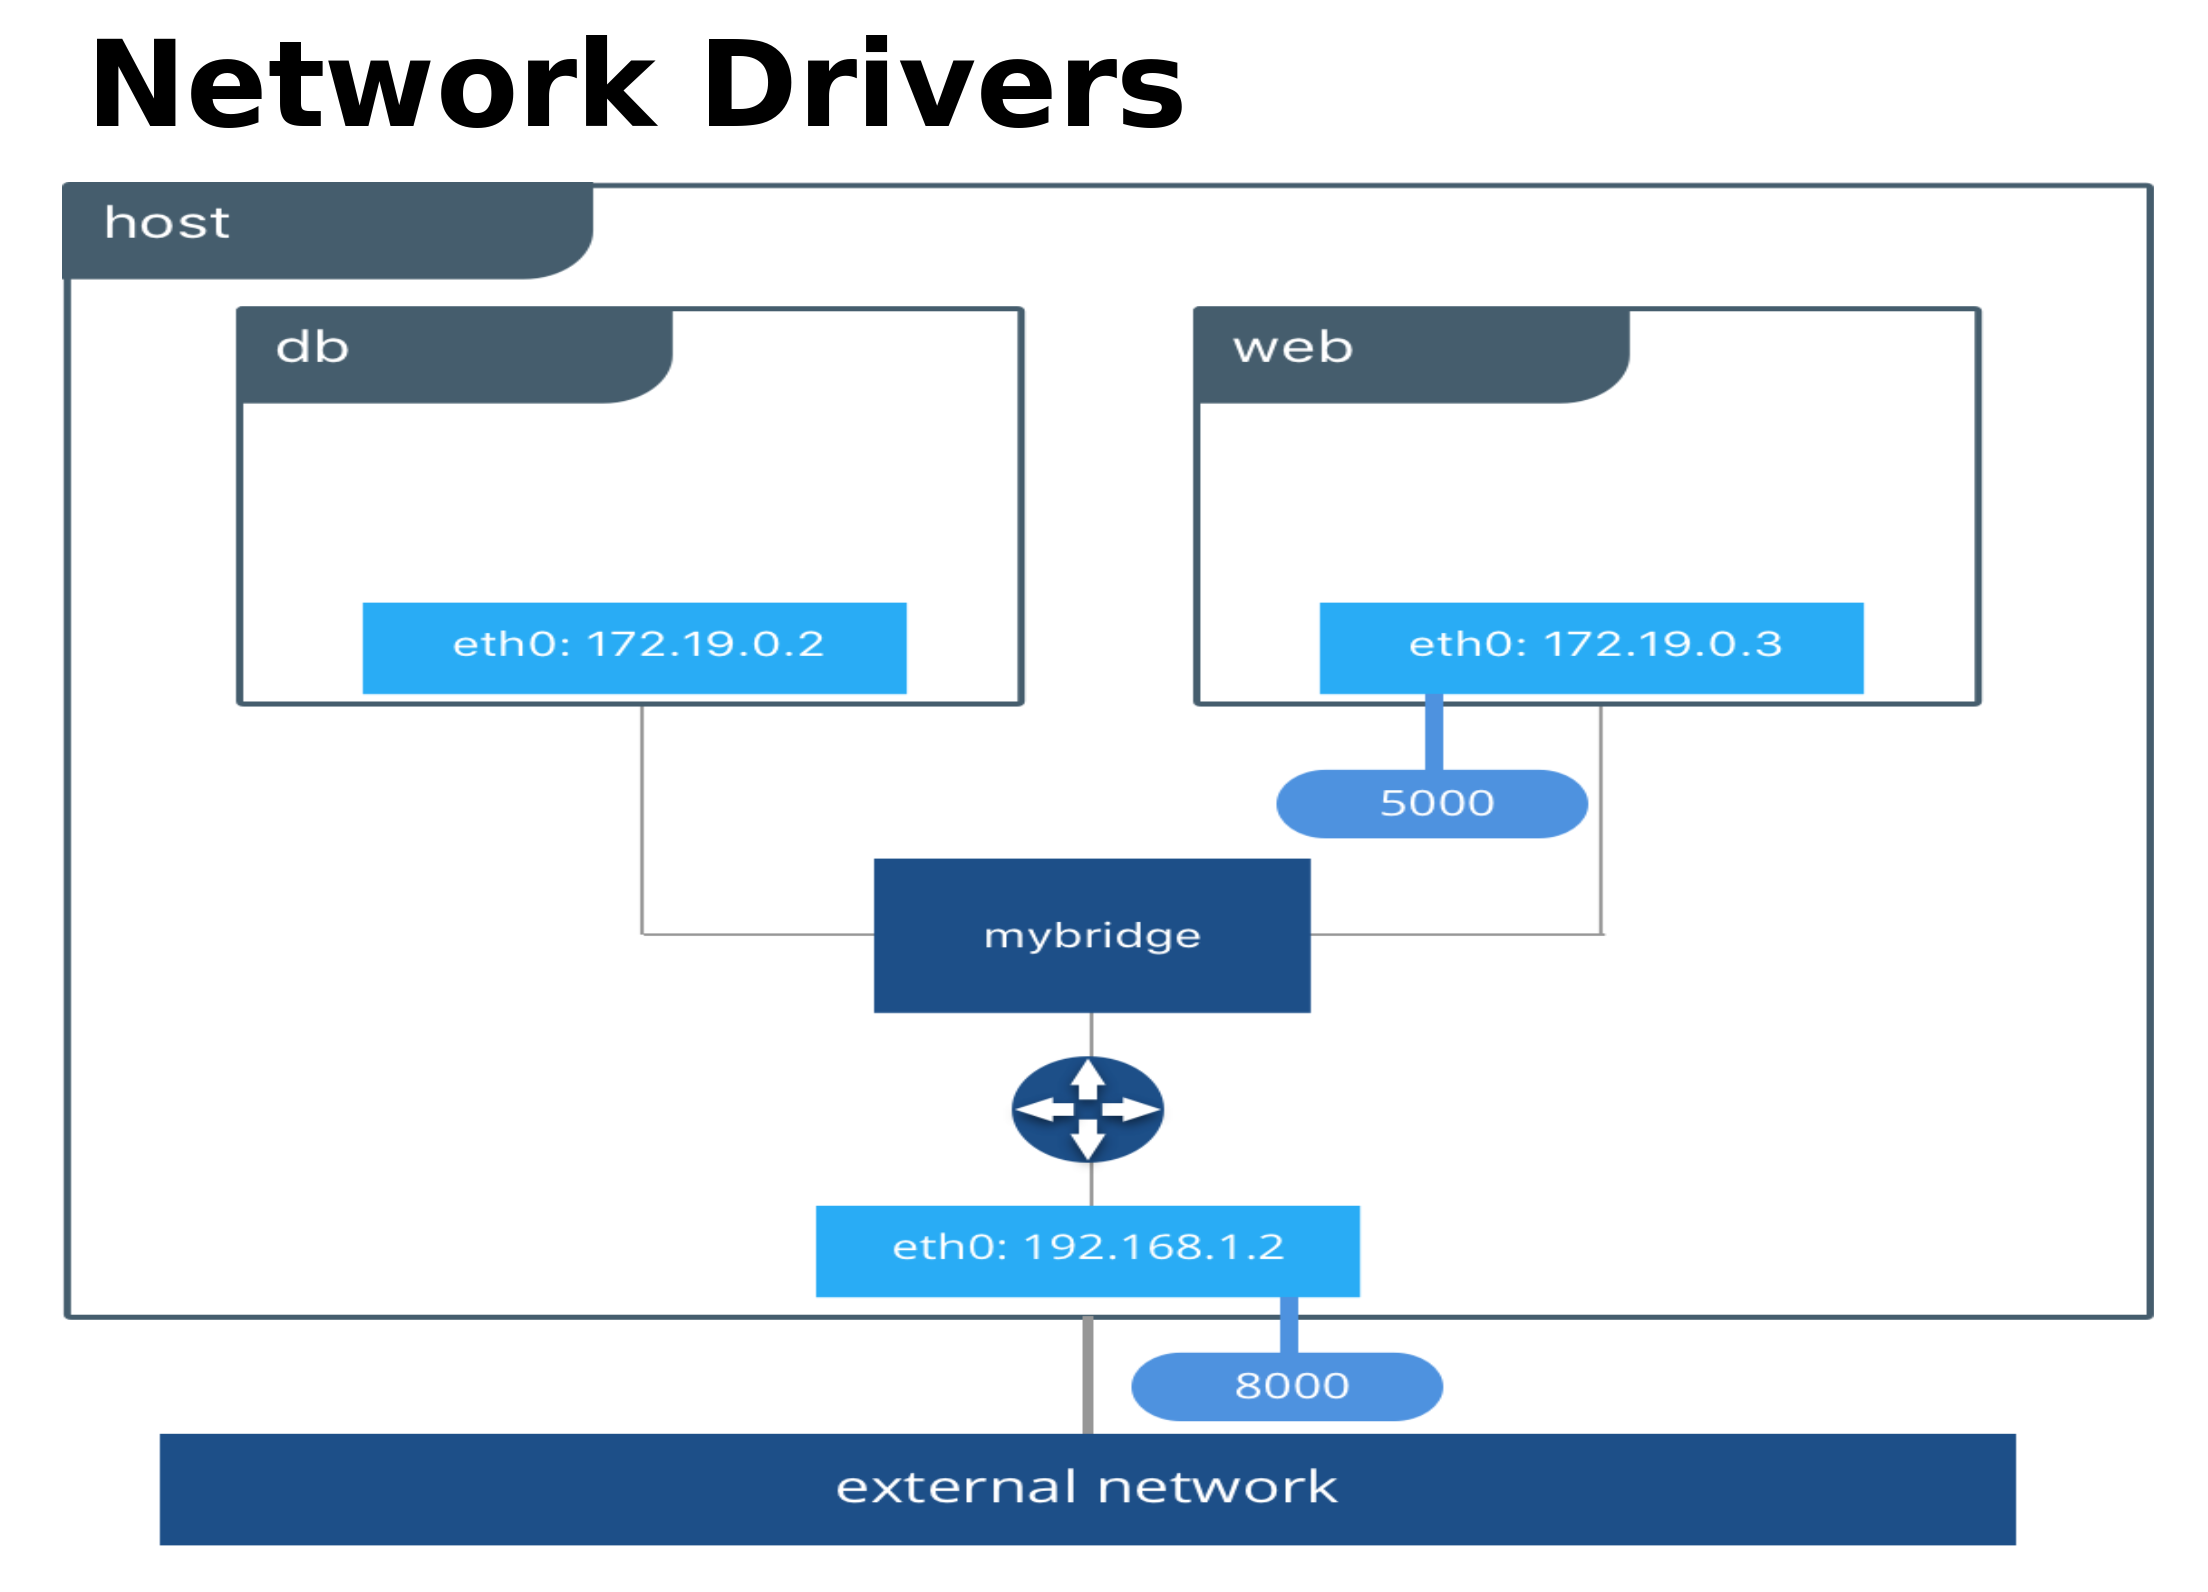 Container network. Docker Network Drivers. Docker Network Driver Types. Docker compose External Network. Docker compose Networks options.